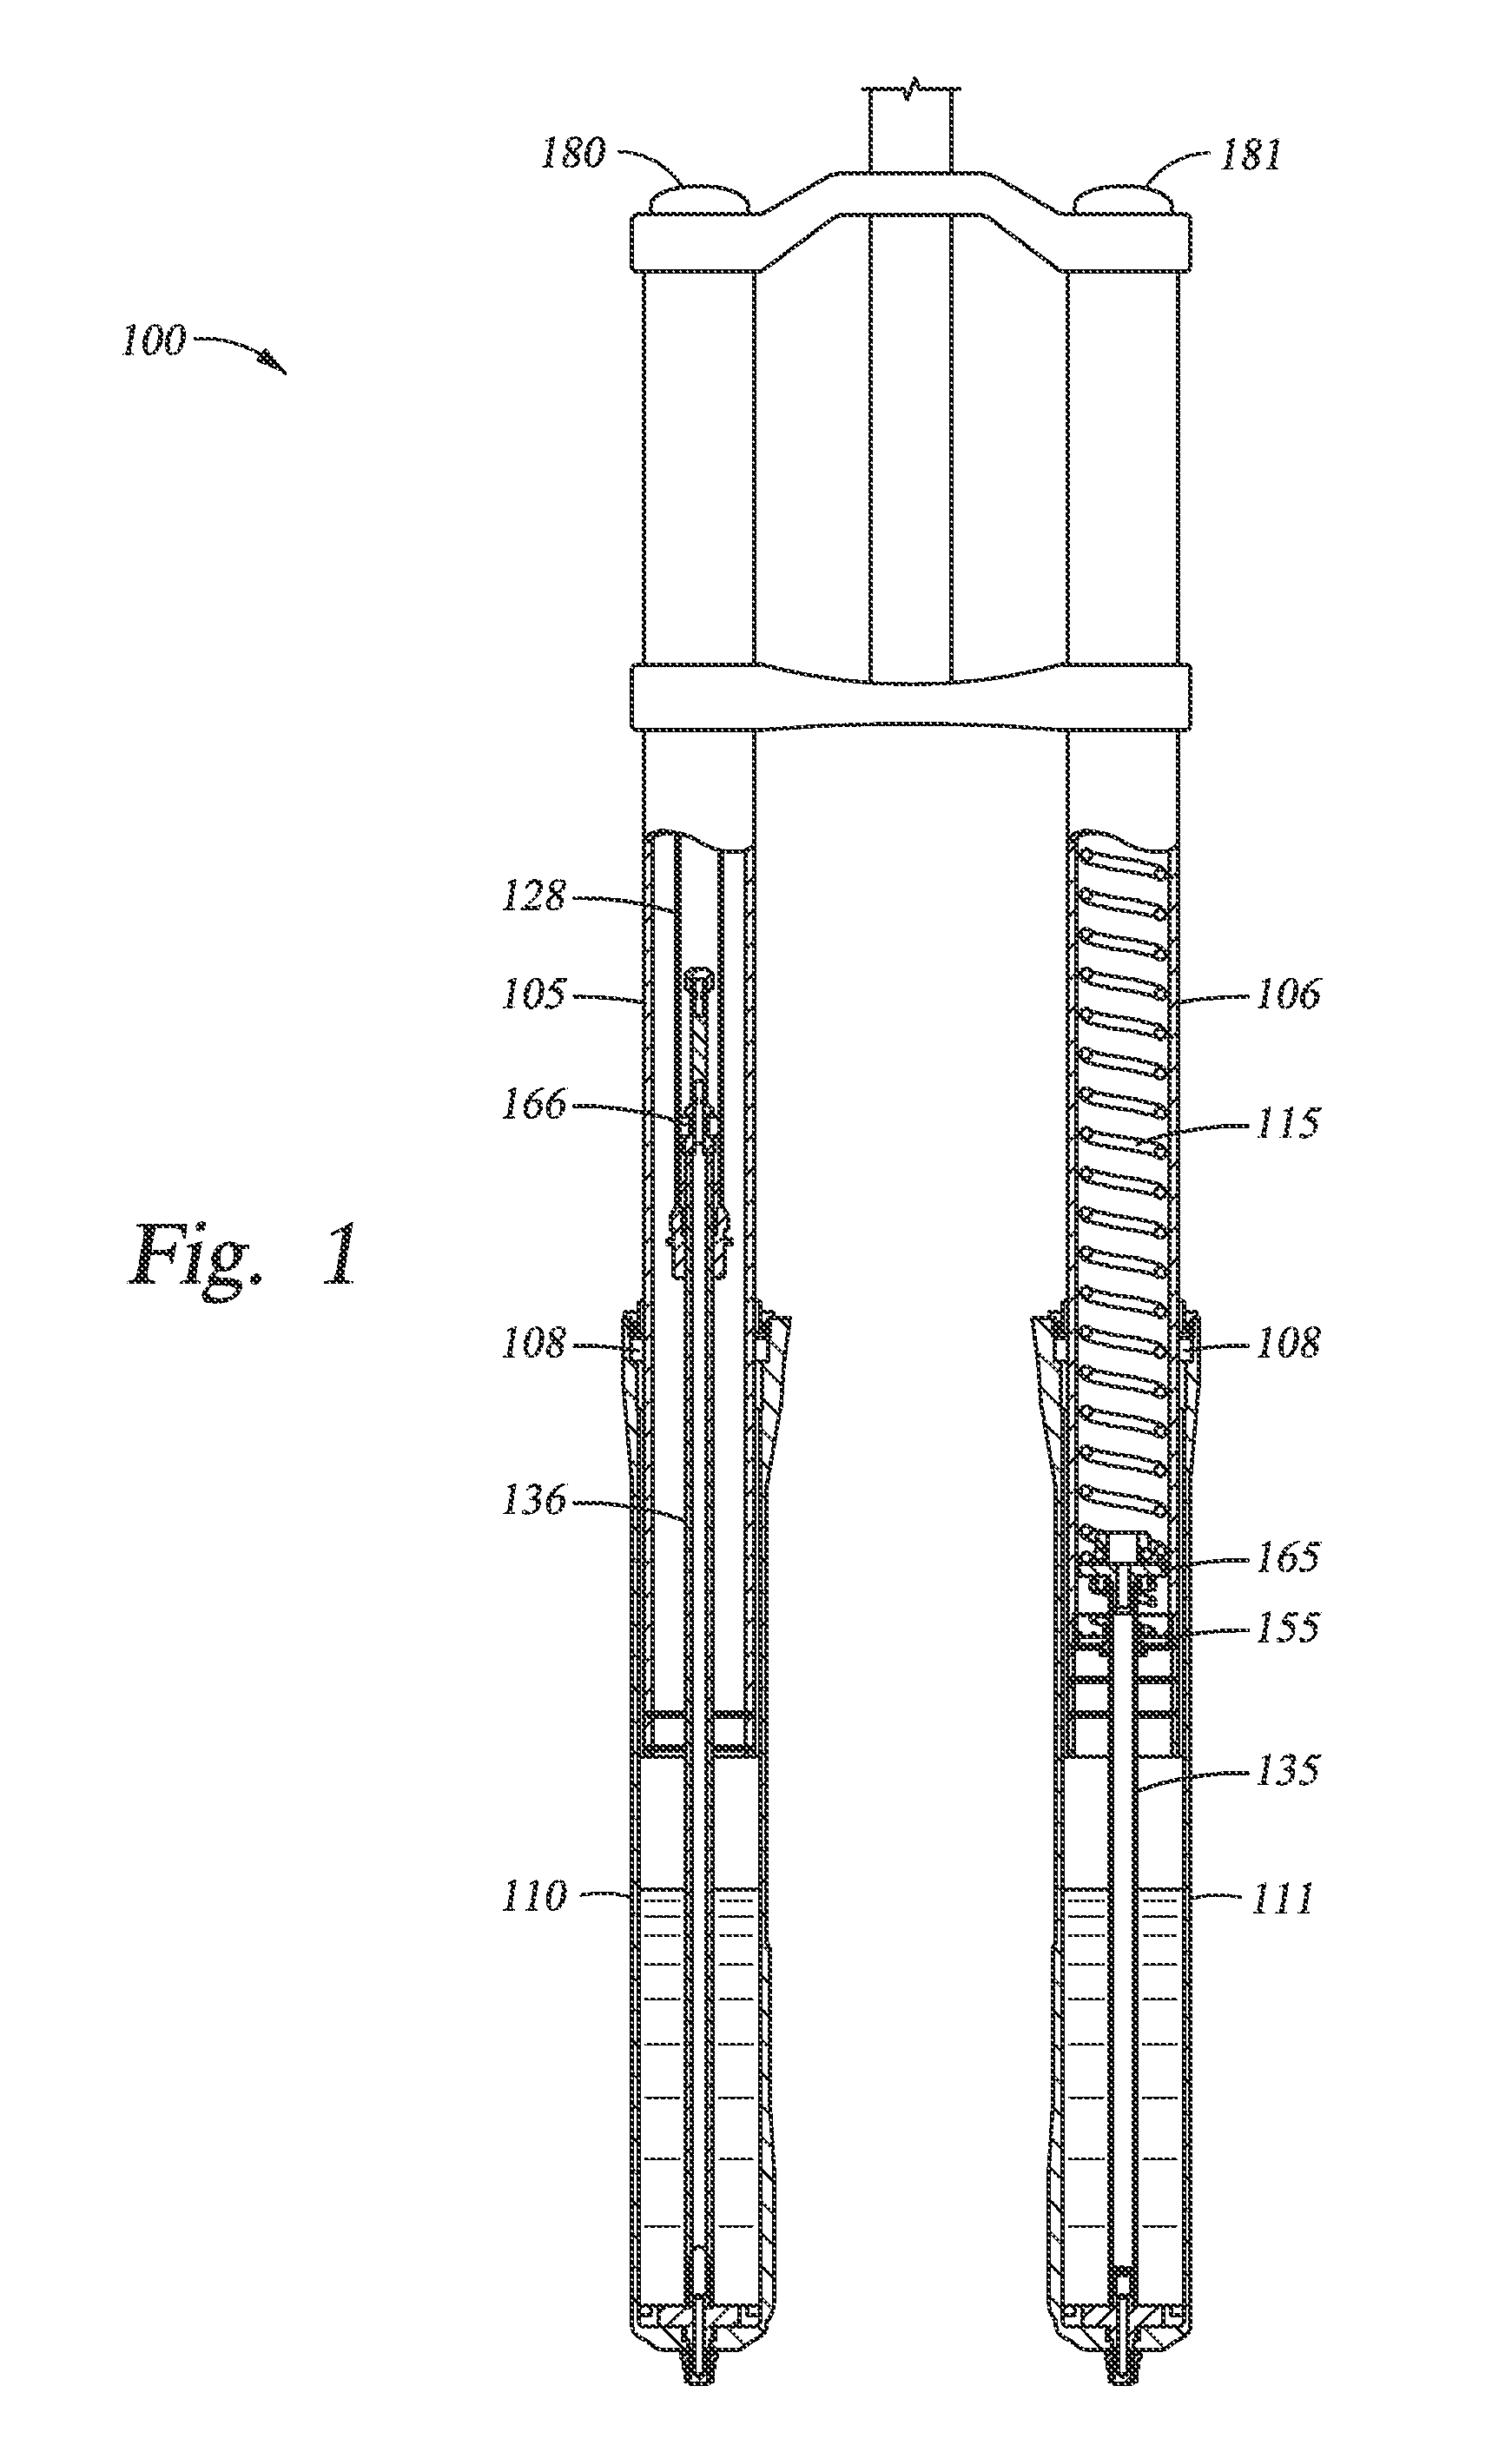 Methods and apparatus for position sensitive suspension damping